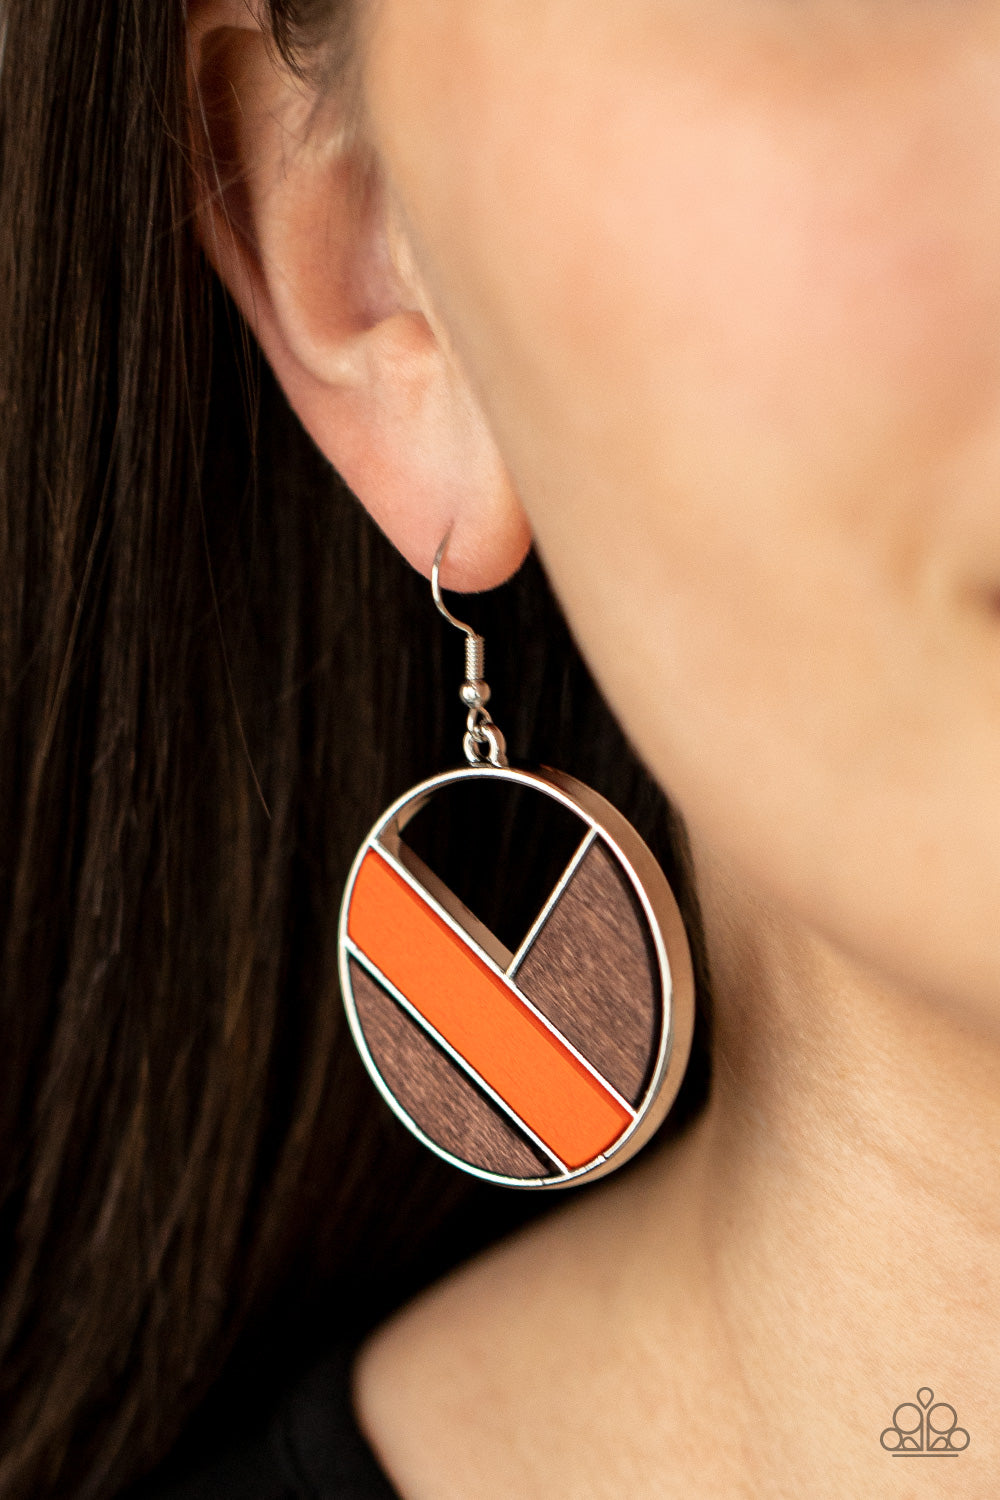 Paparazzi Dont Be MODest - Orange Earrings - A Finishing Touch Jewelry